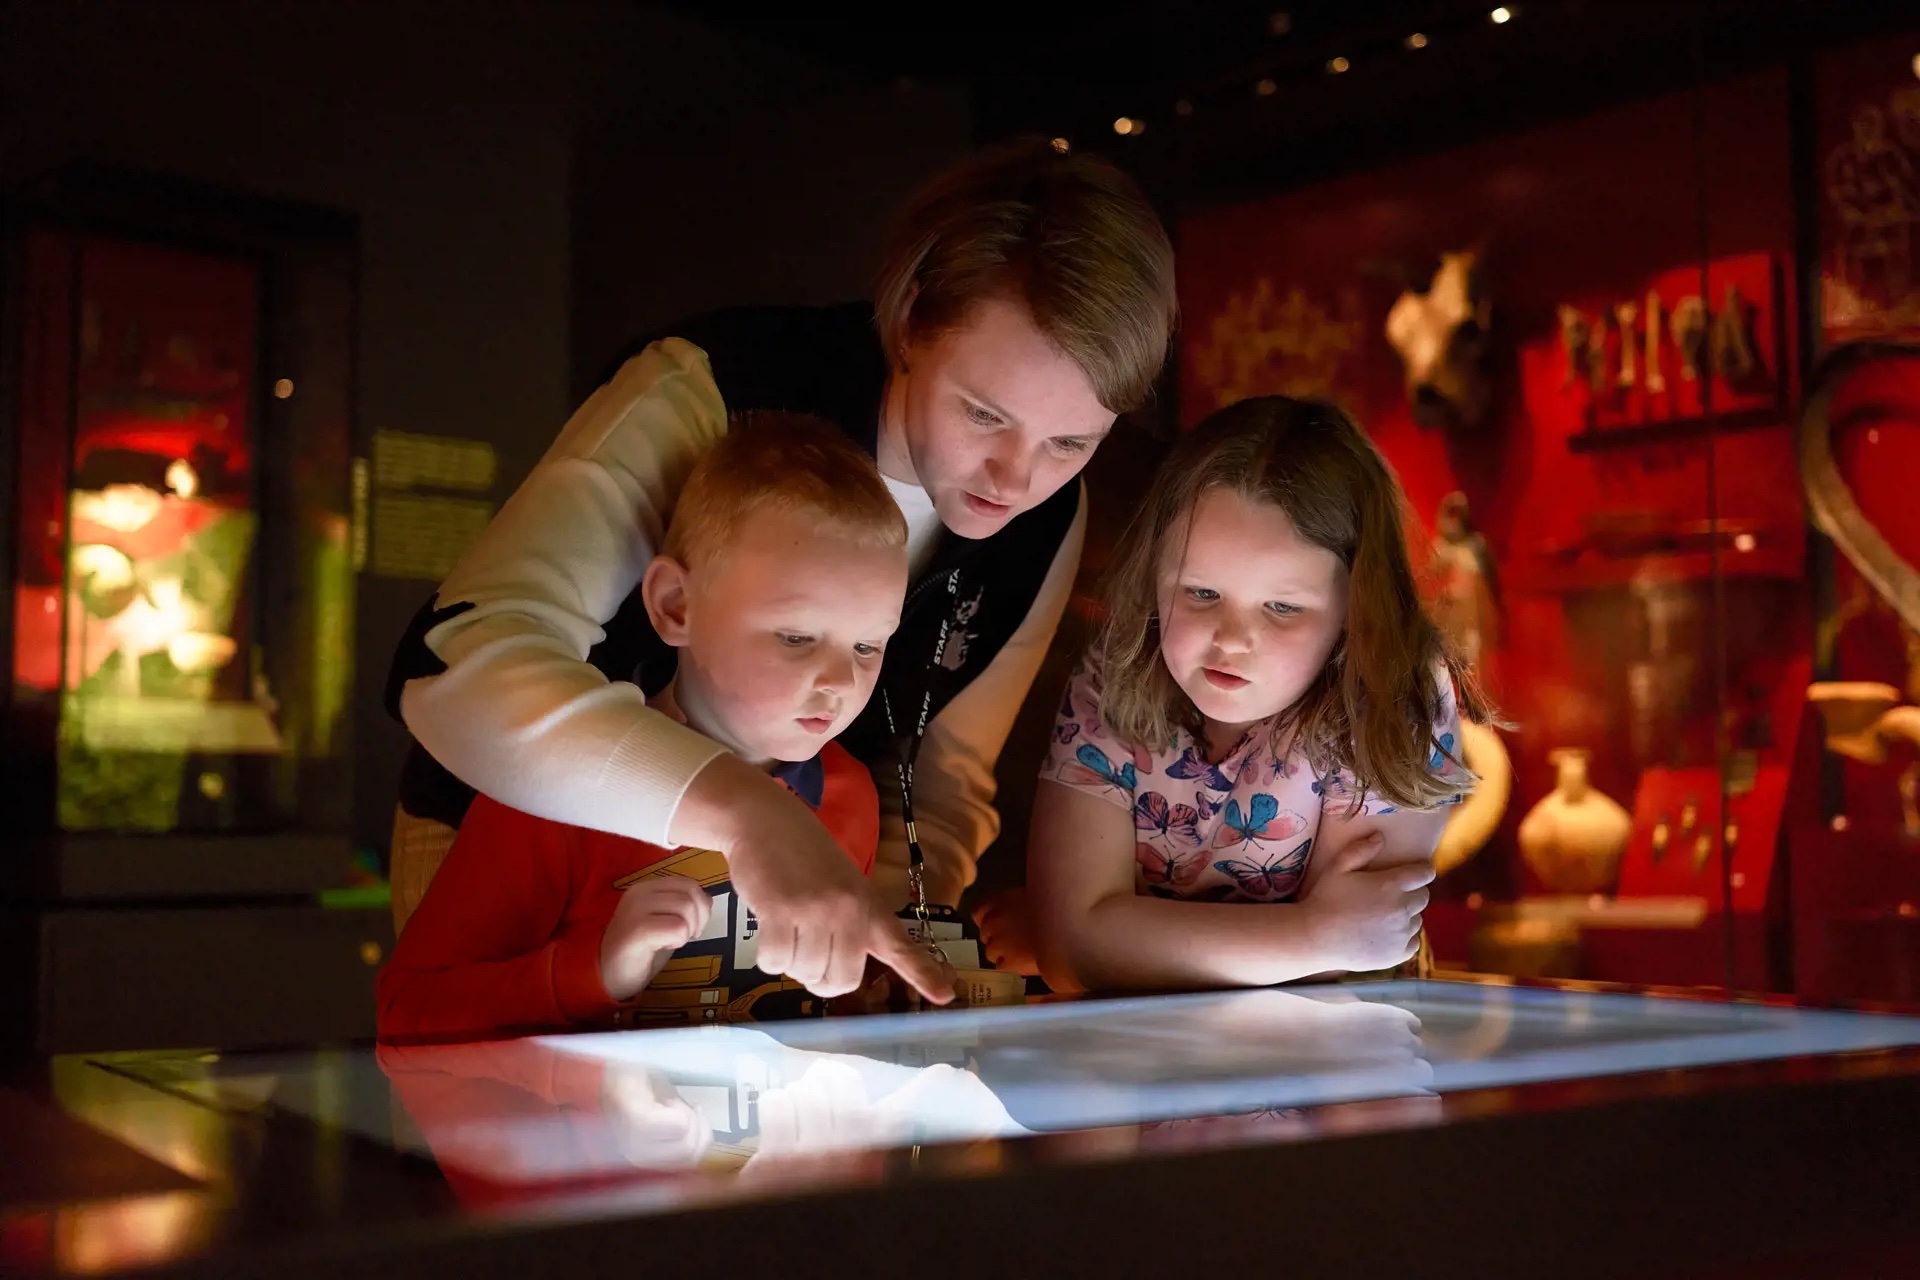 Children looking at the interactive table